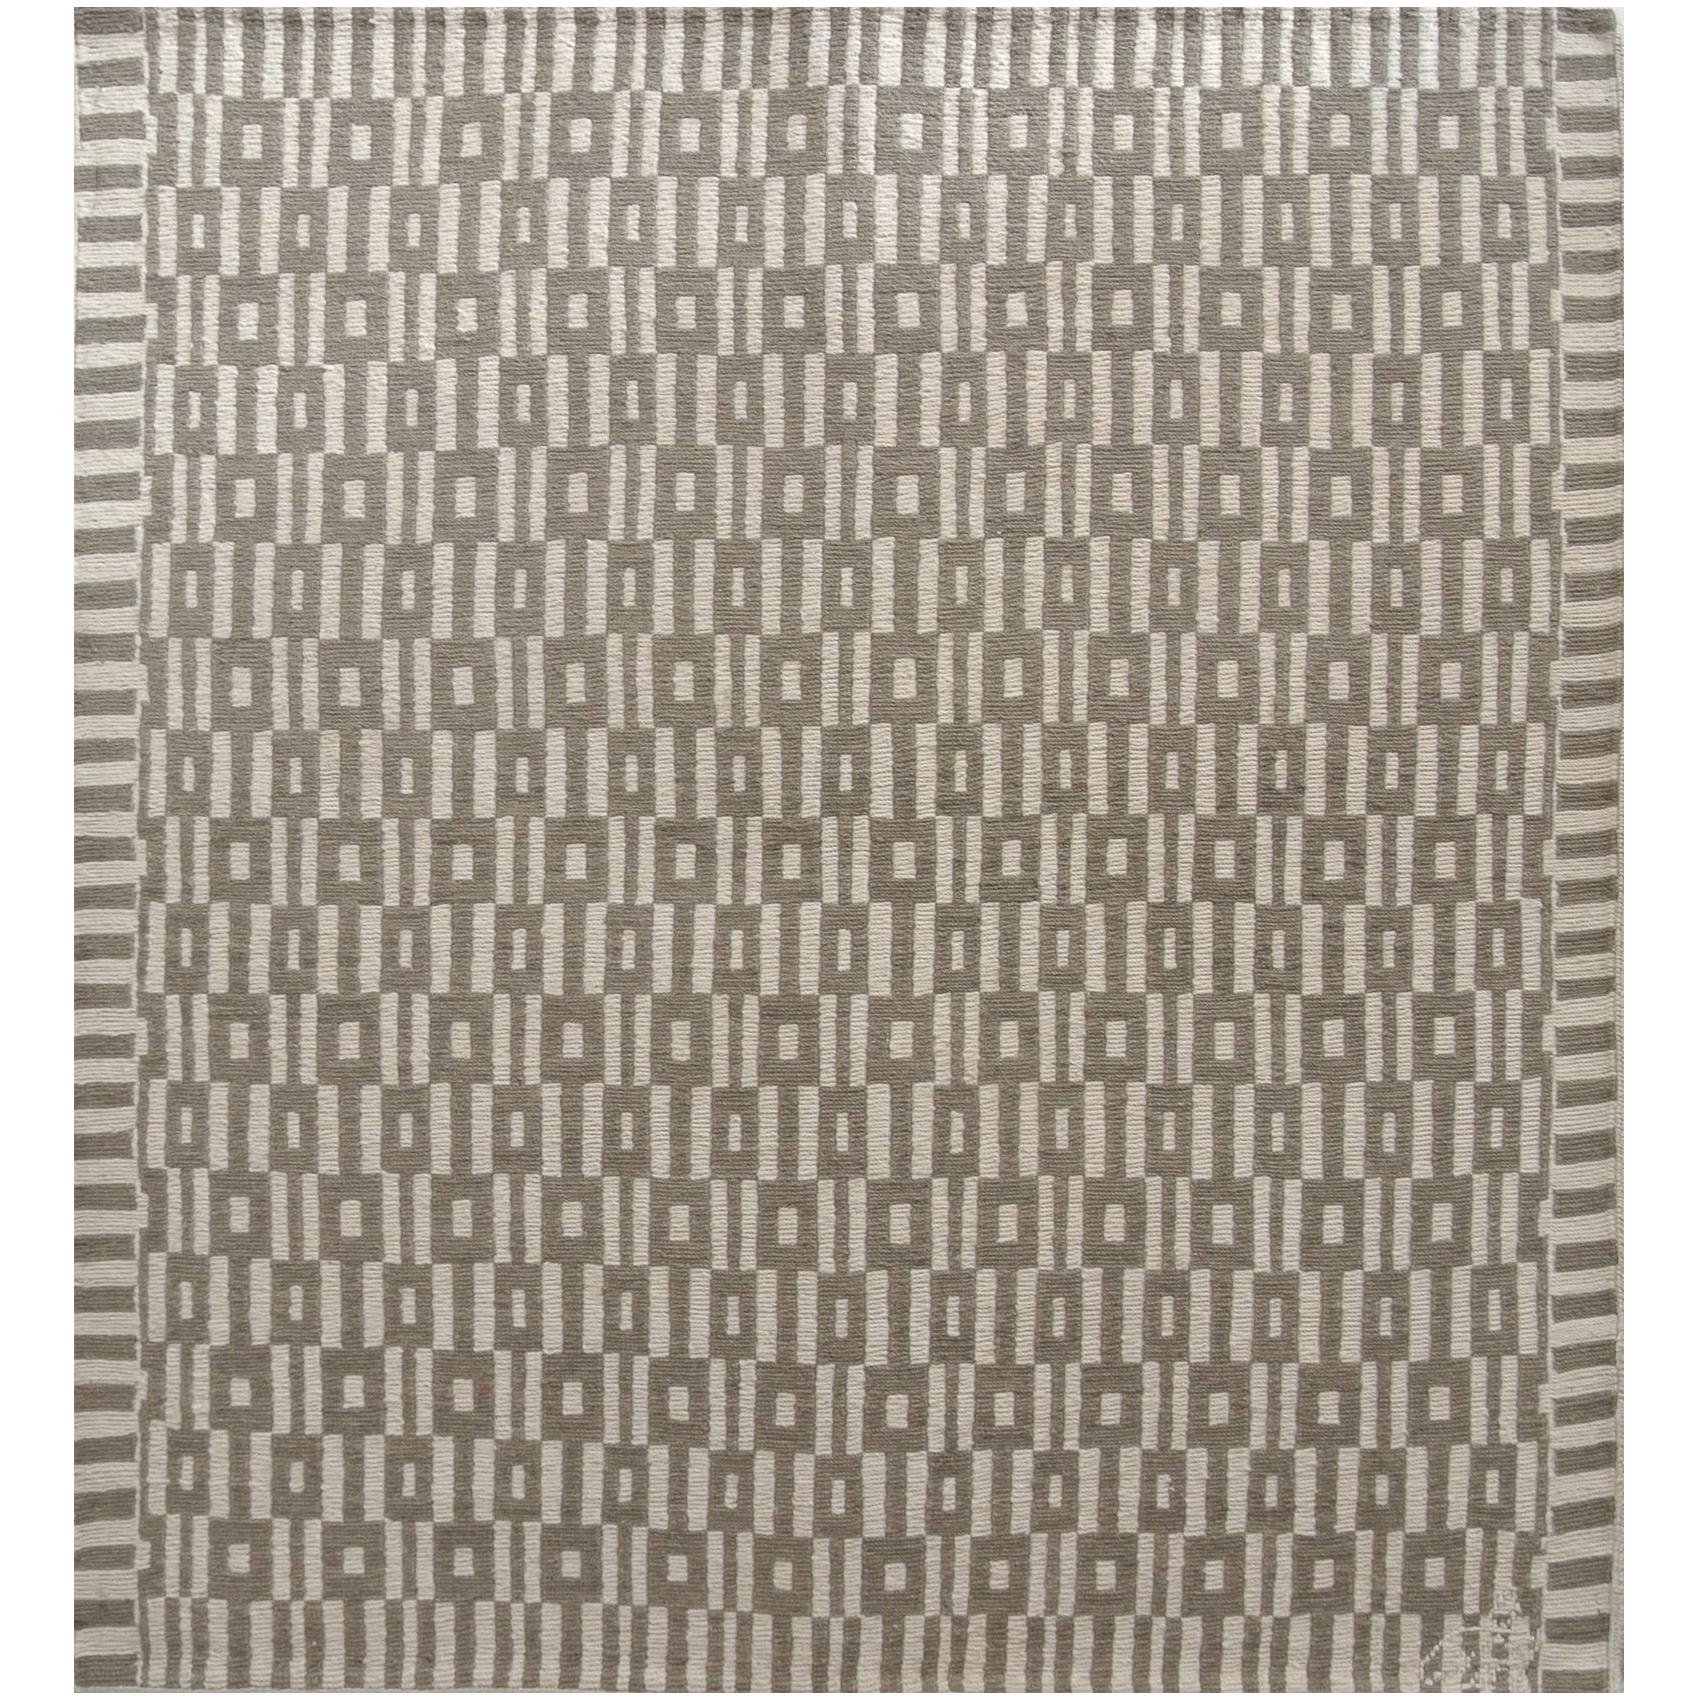 Orley Shabahang "Windows" Wool Persian Carpet, Gray and Cream, 3' x 4' For Sale